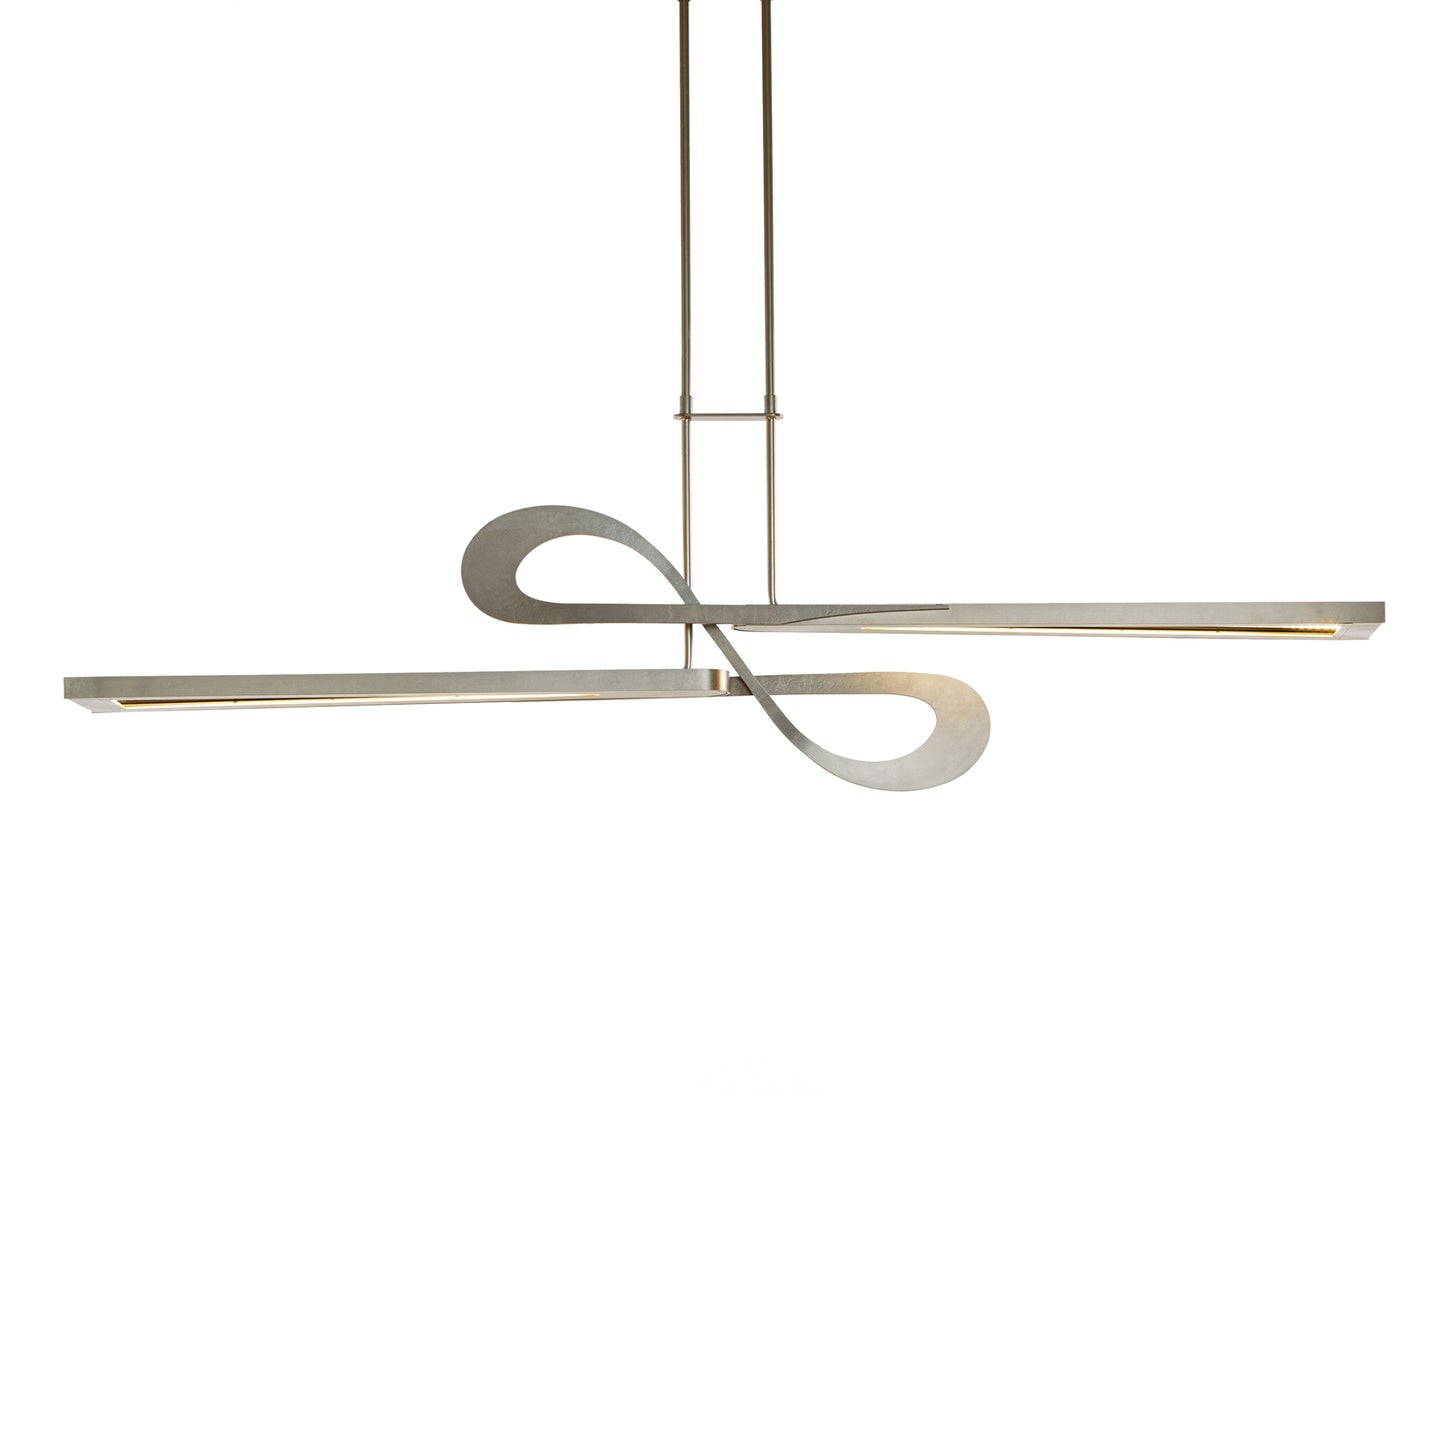 A Hubbardton Forge Switchback Pendant inspired by the natural beauty of Vermont, featuring a sleek and curved shape.